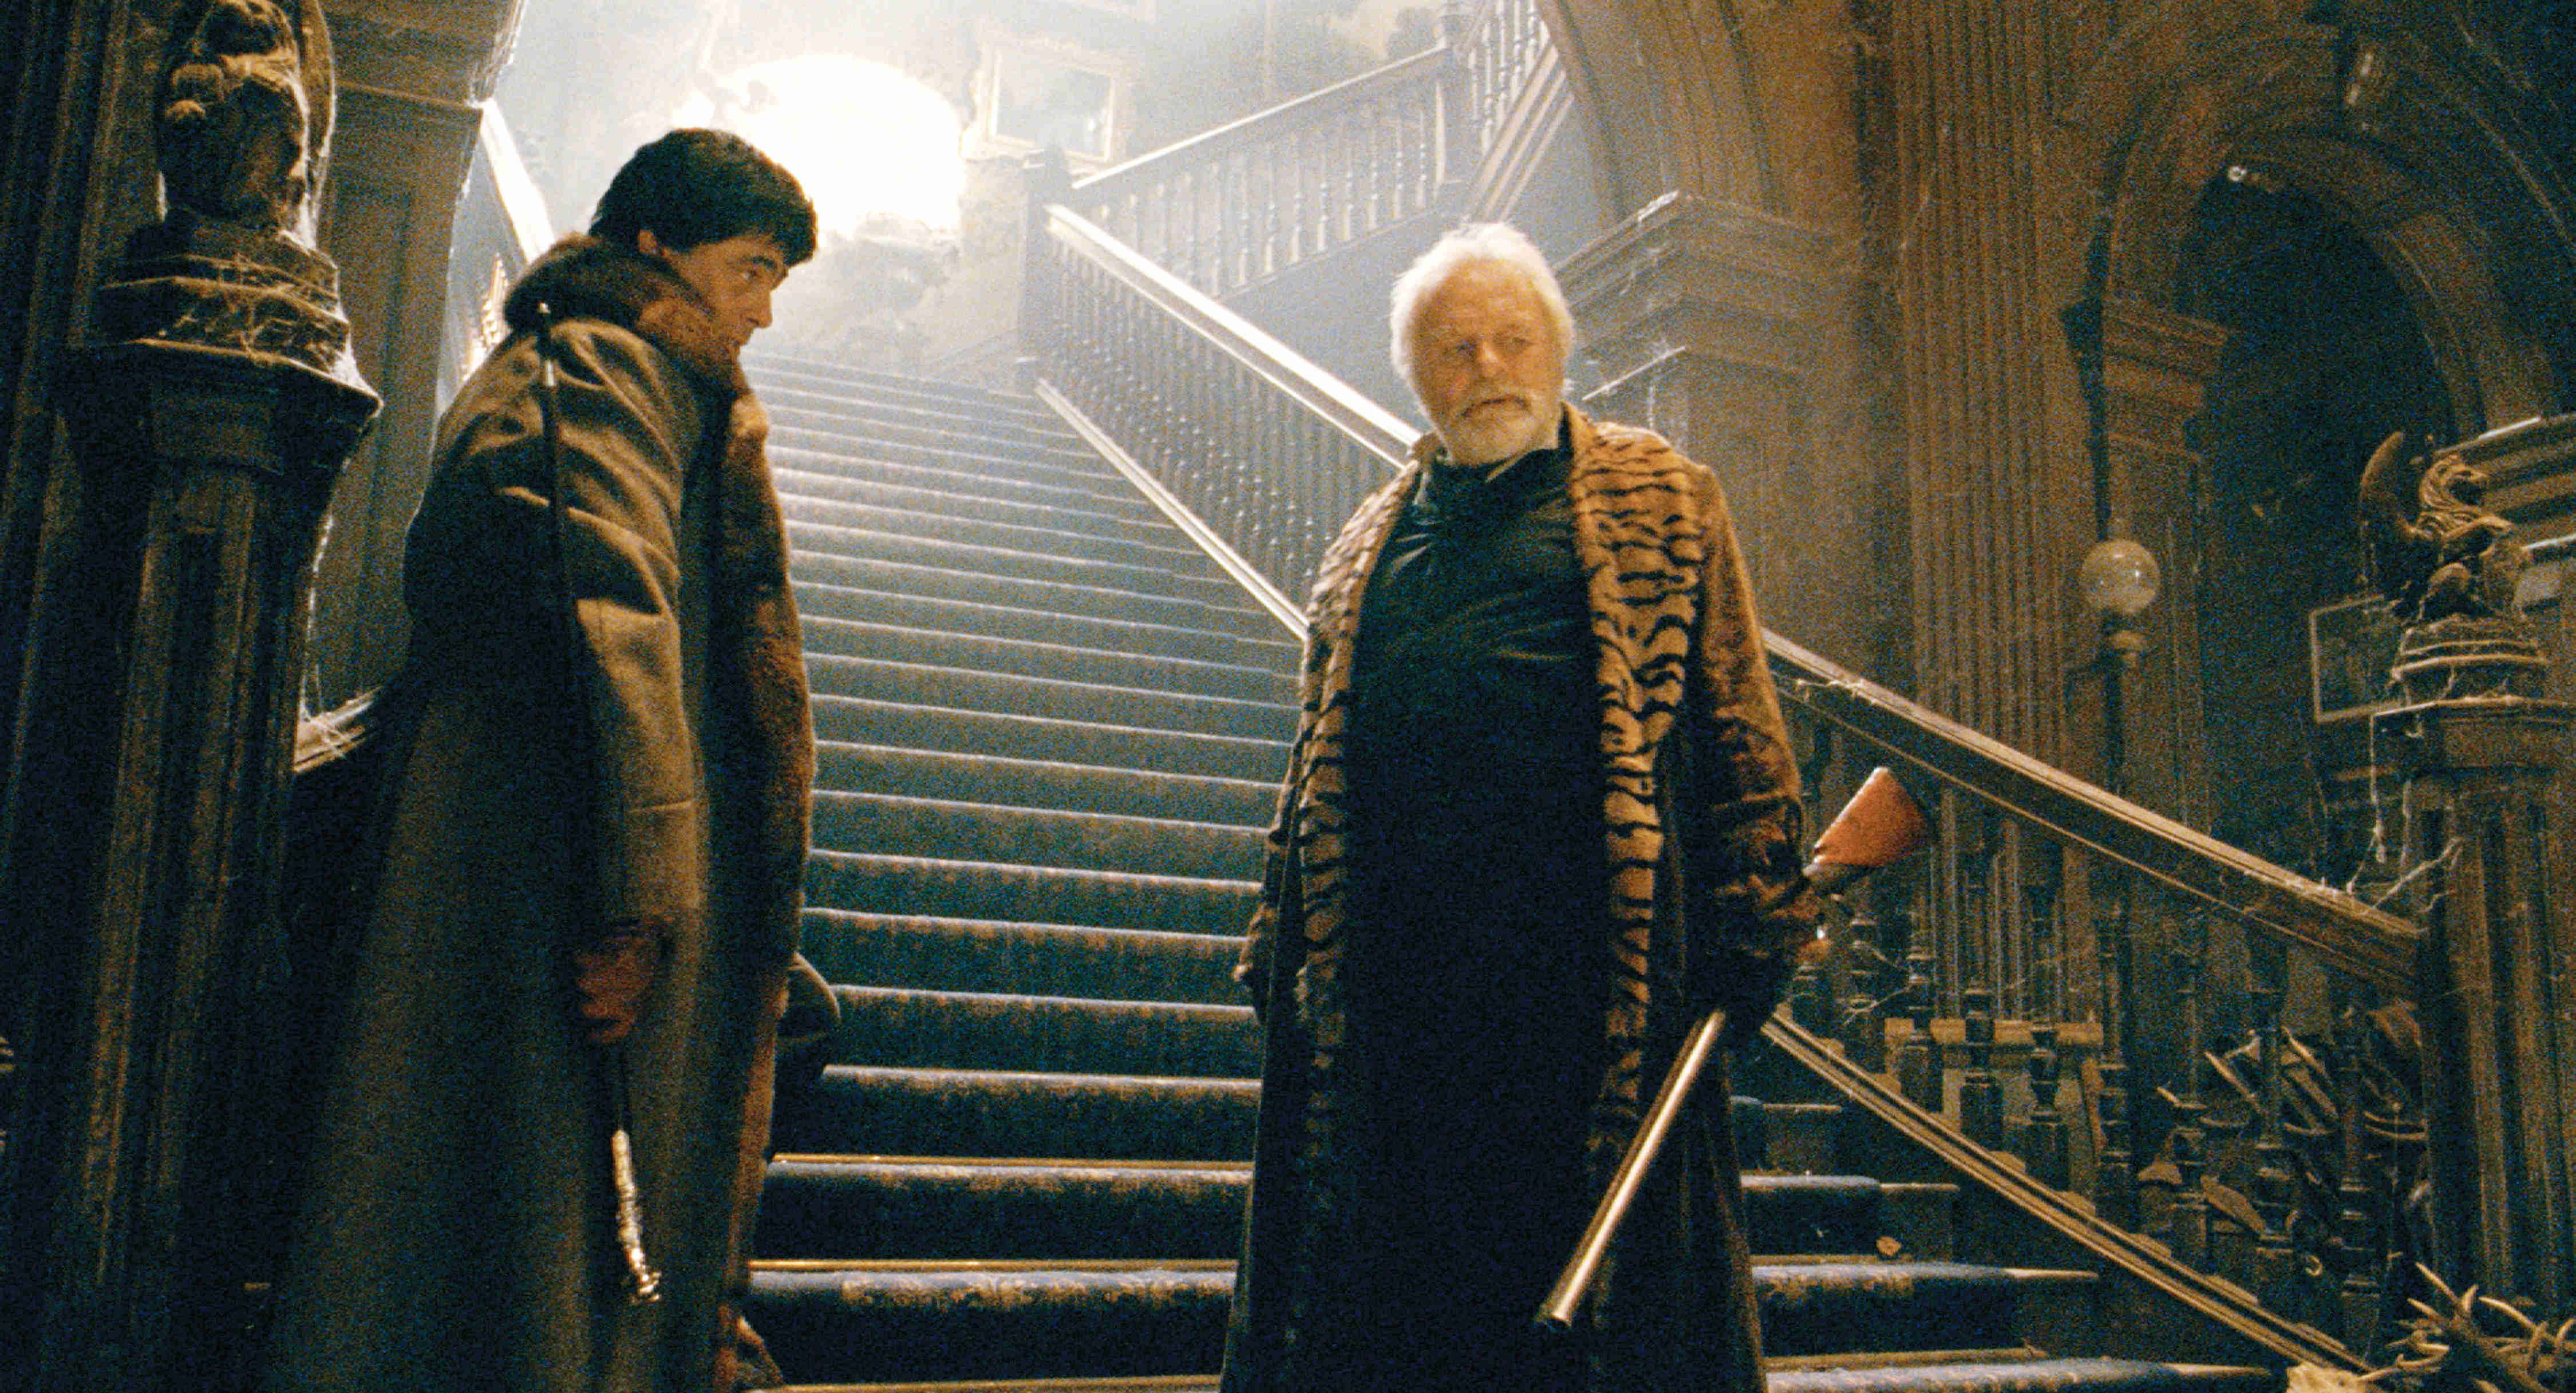 Benicio Del Toro stars as Lawrence Talbot and Anthony Hopkins stars as Sir John Talbot in Universal Pictures' The Wolfman (2009)